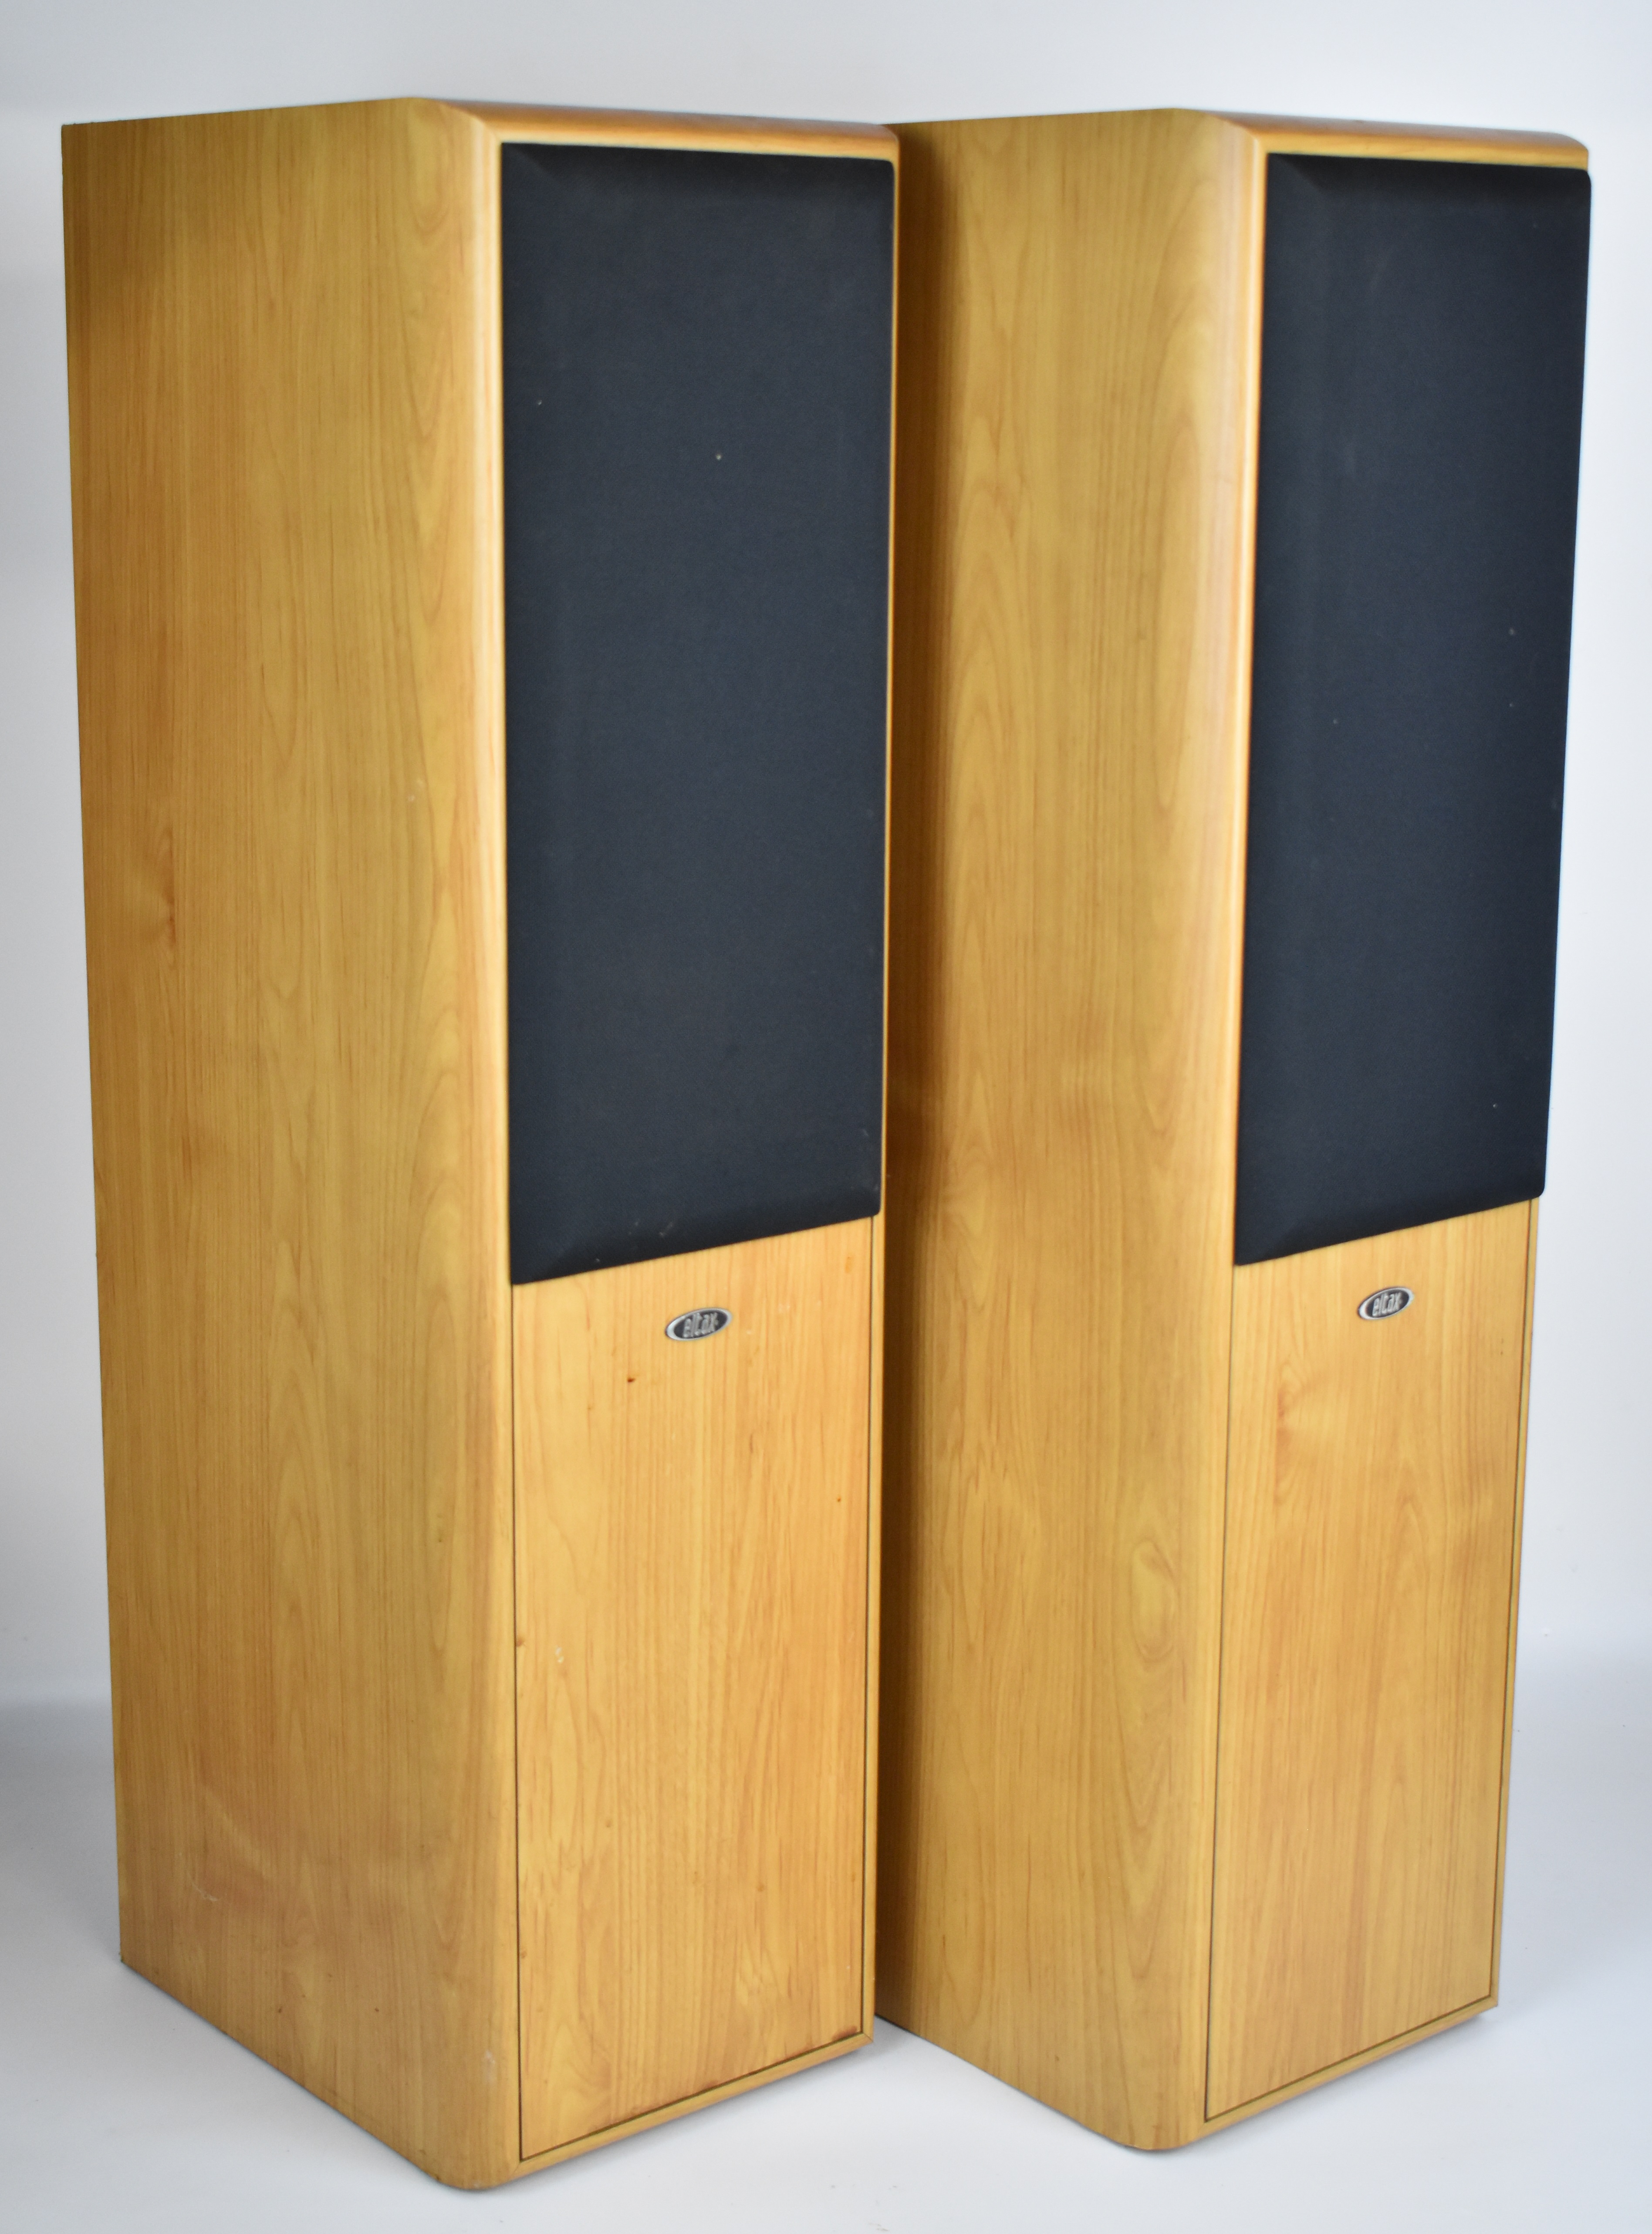 Pair of Eltax Symphony 6.2 stereo speakers, height 84cm - Image 2 of 4